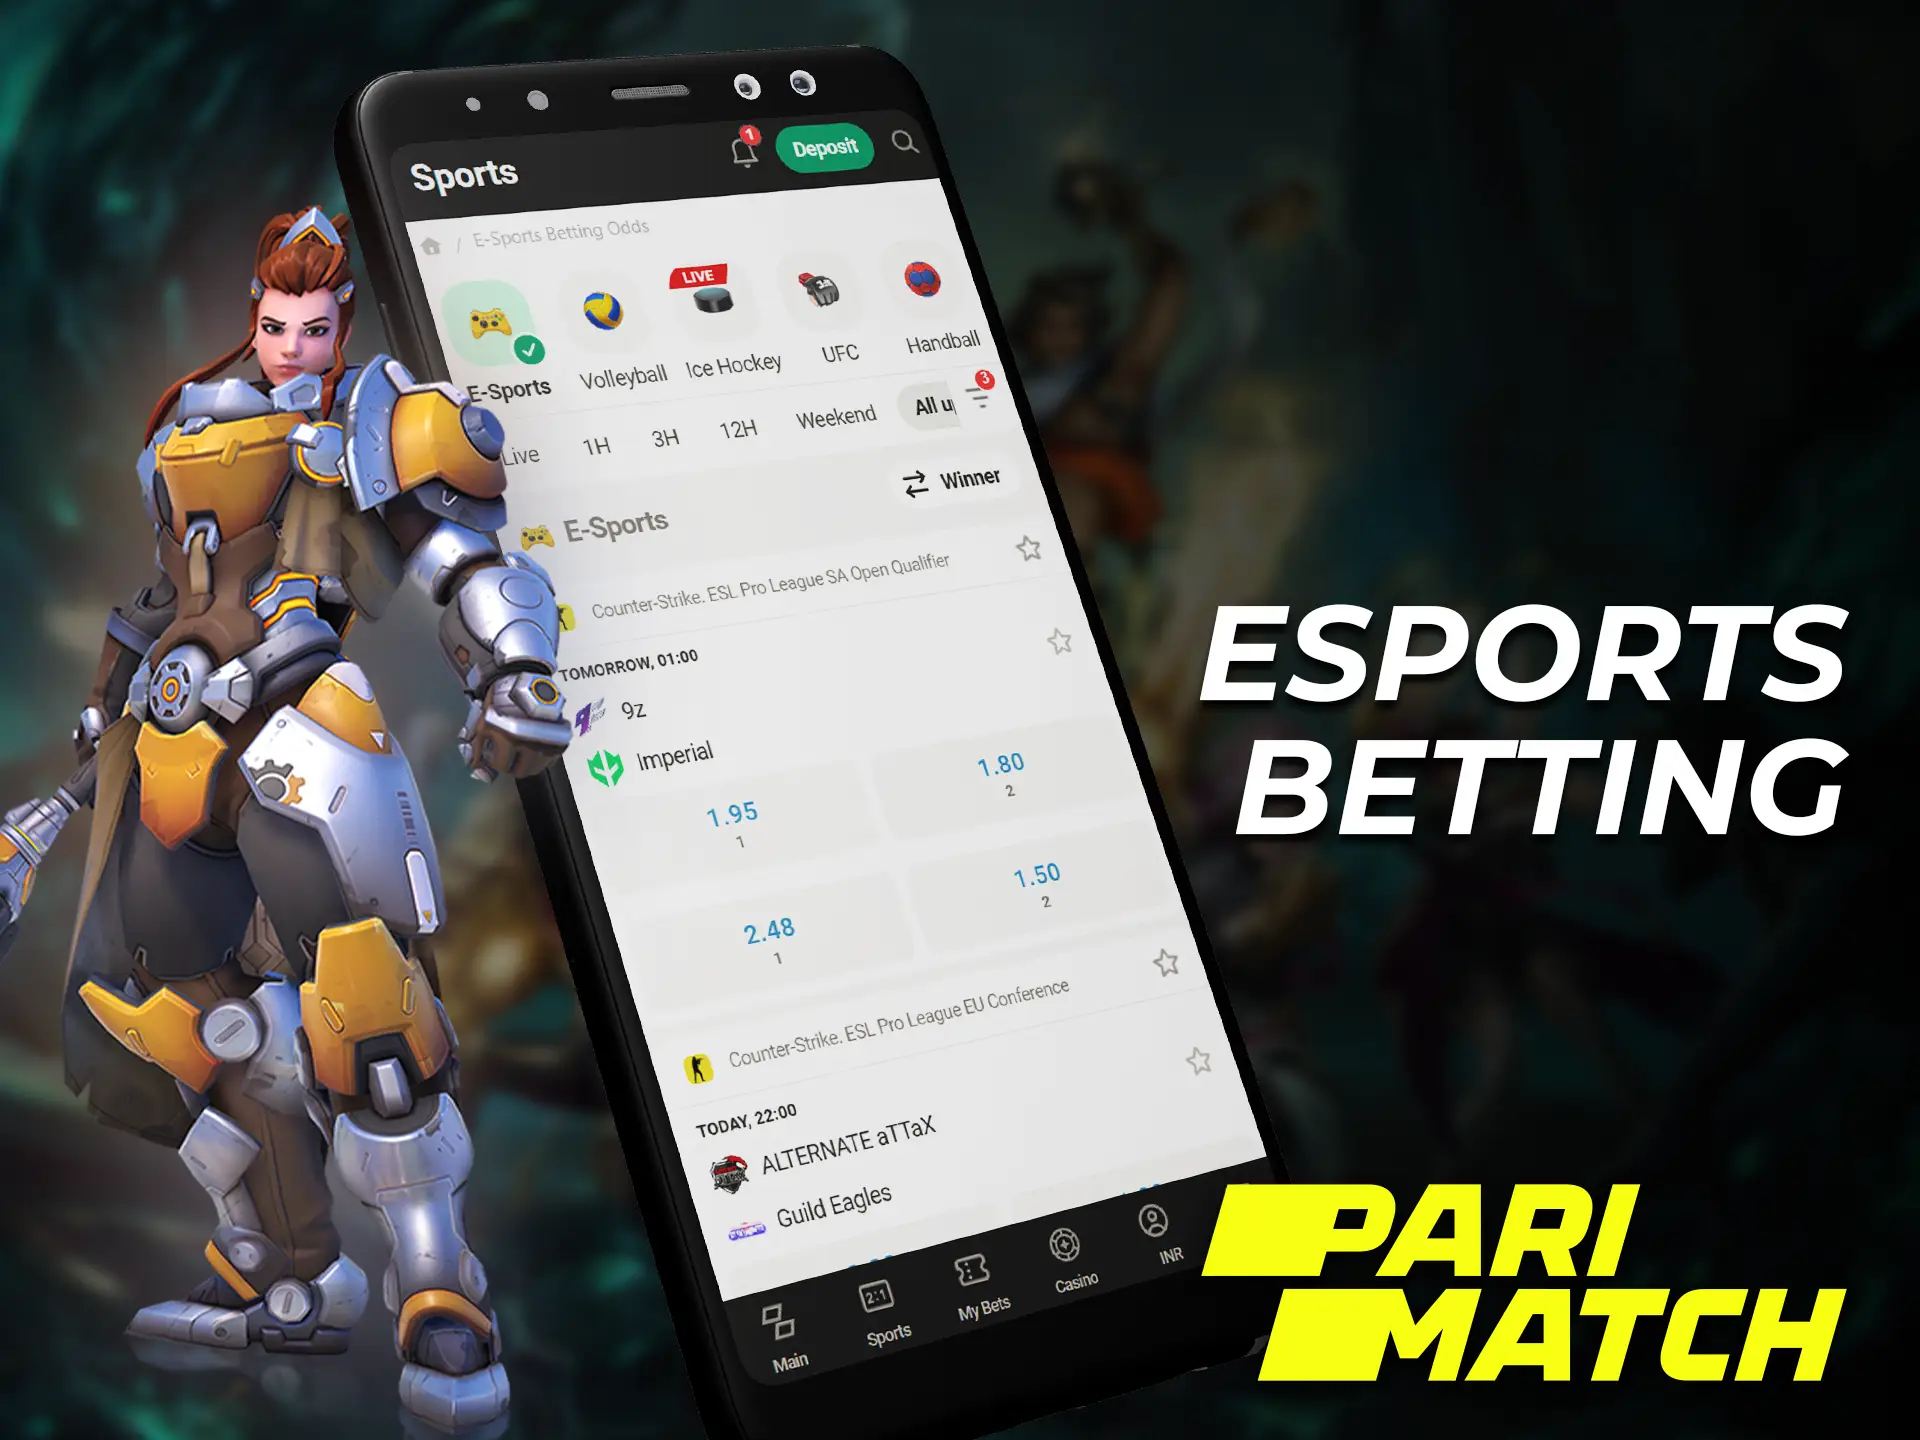 Excellent selection of bets on esports disciplines in the Parimatch mobile app.